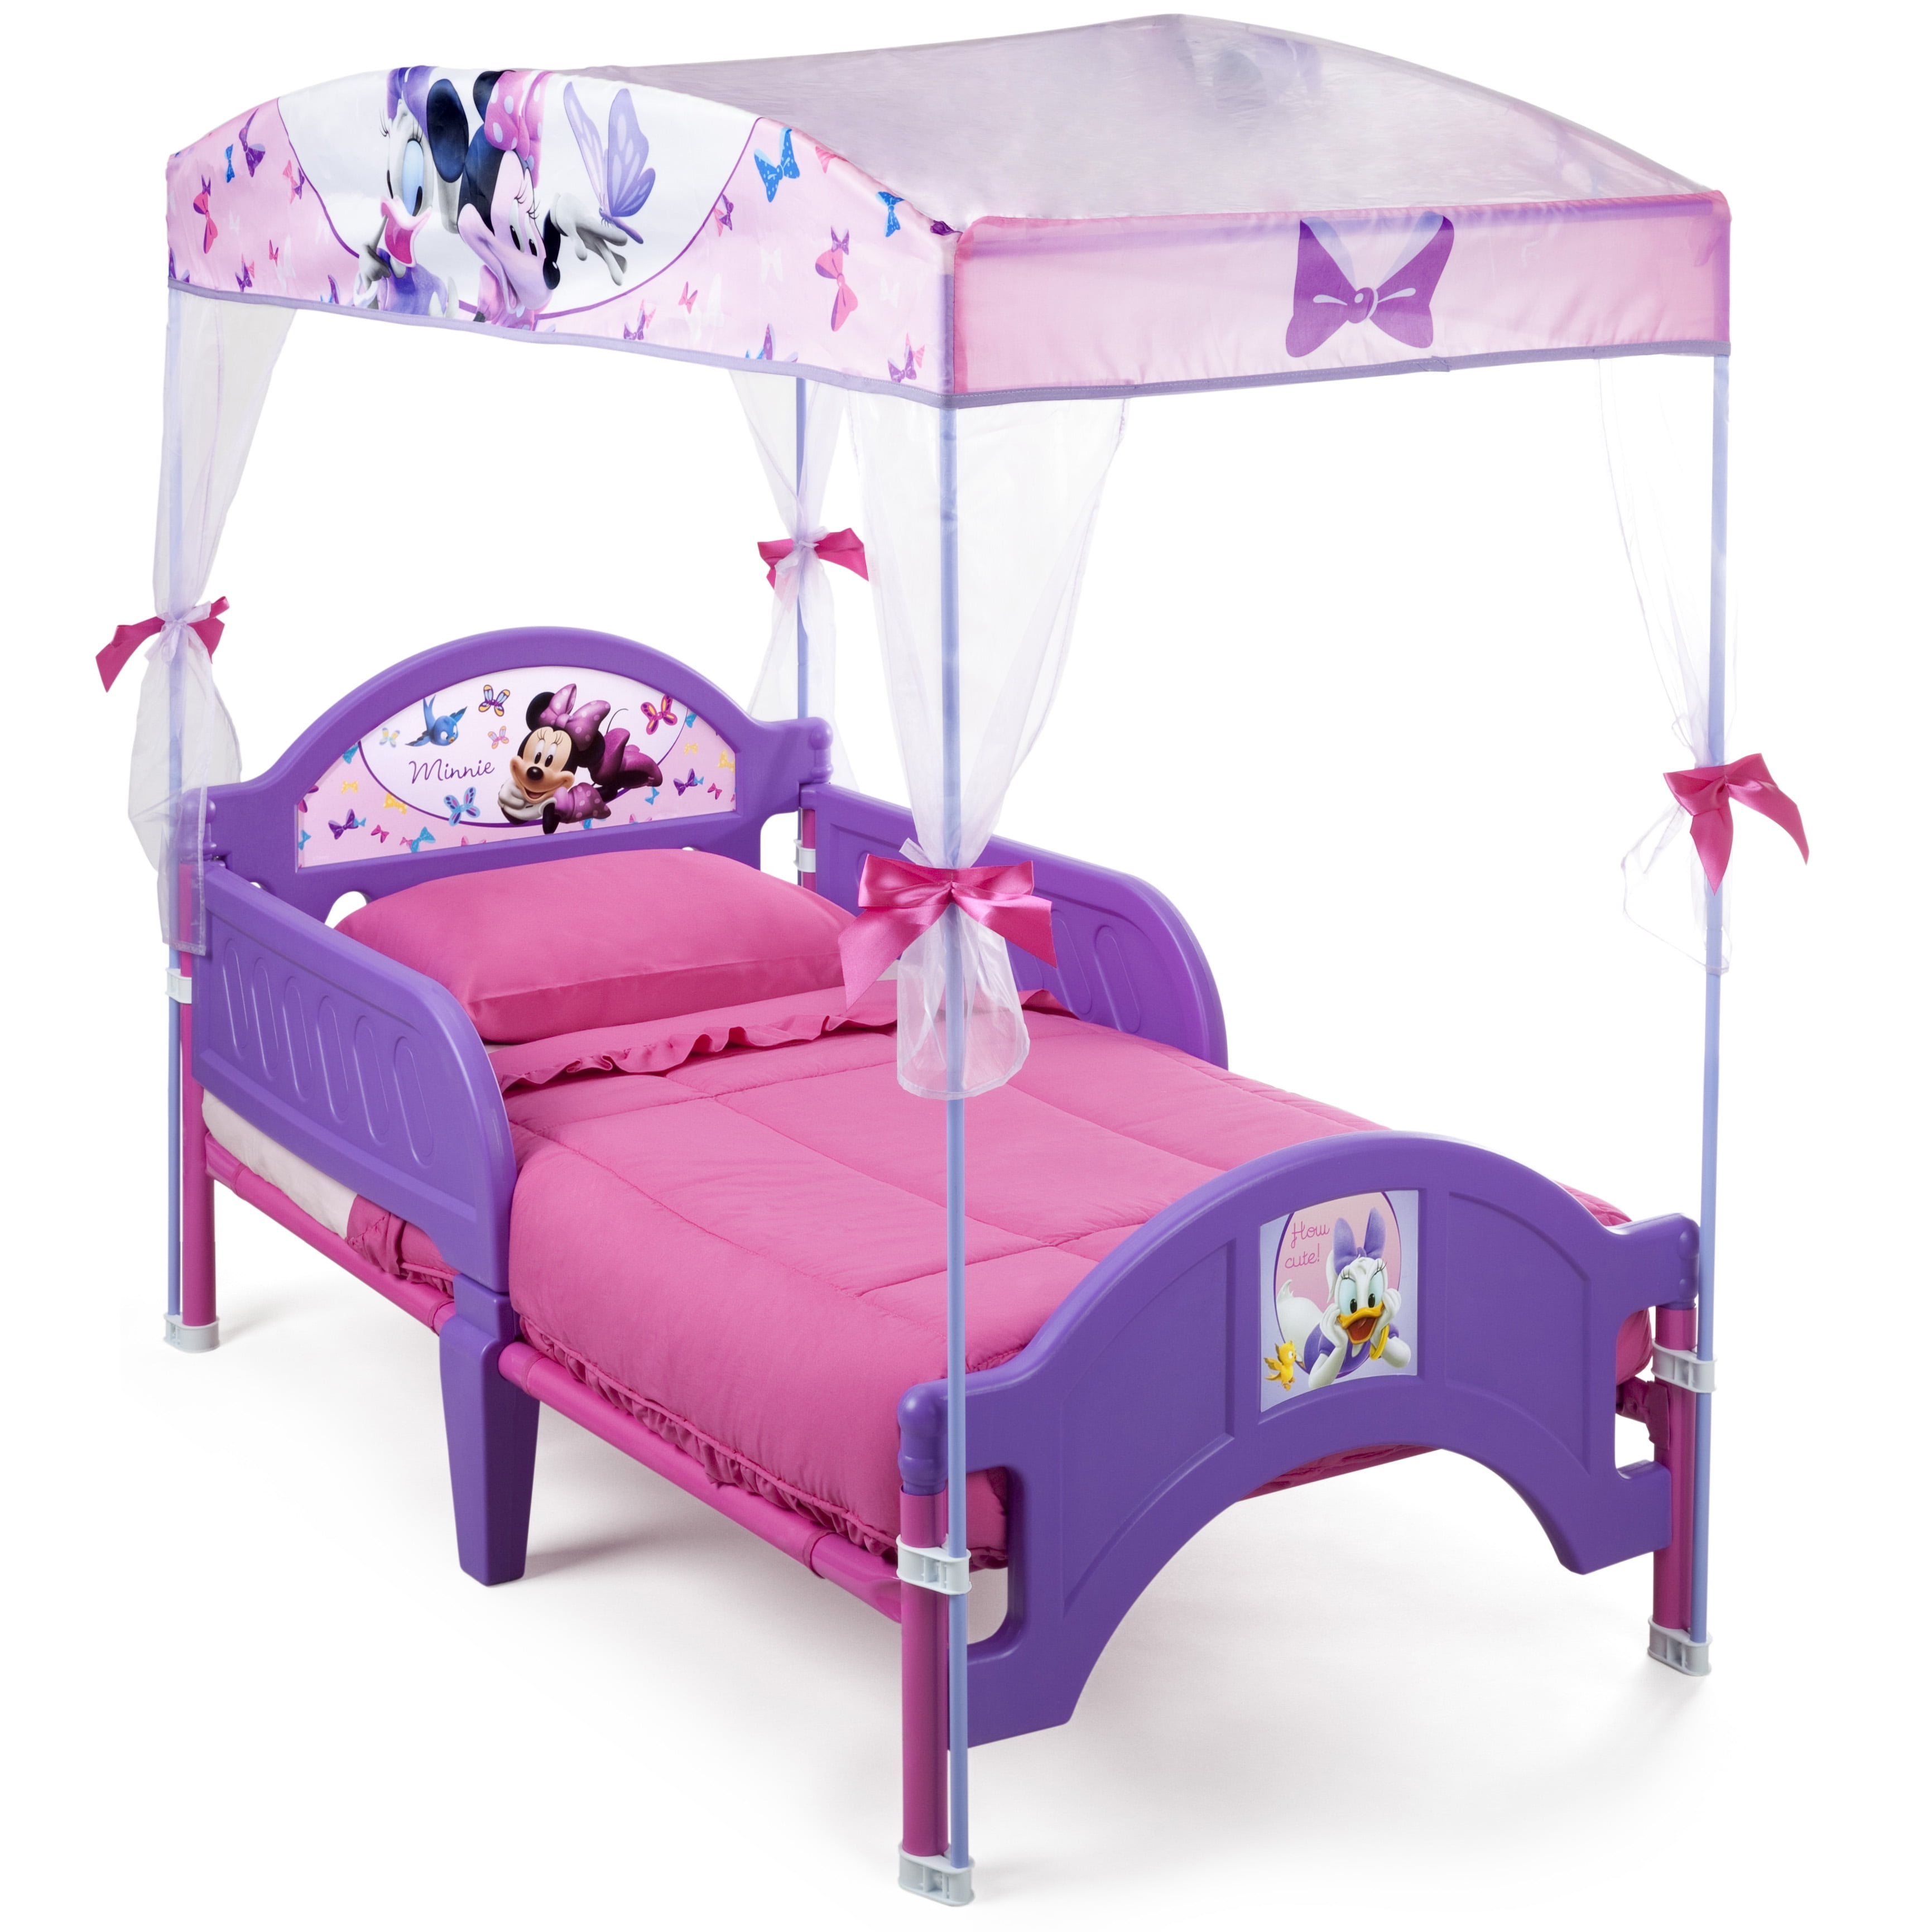 Best Disney Minnie Mouse Toddler Beds For Toddlers Beds For Kids Beds For Girls 